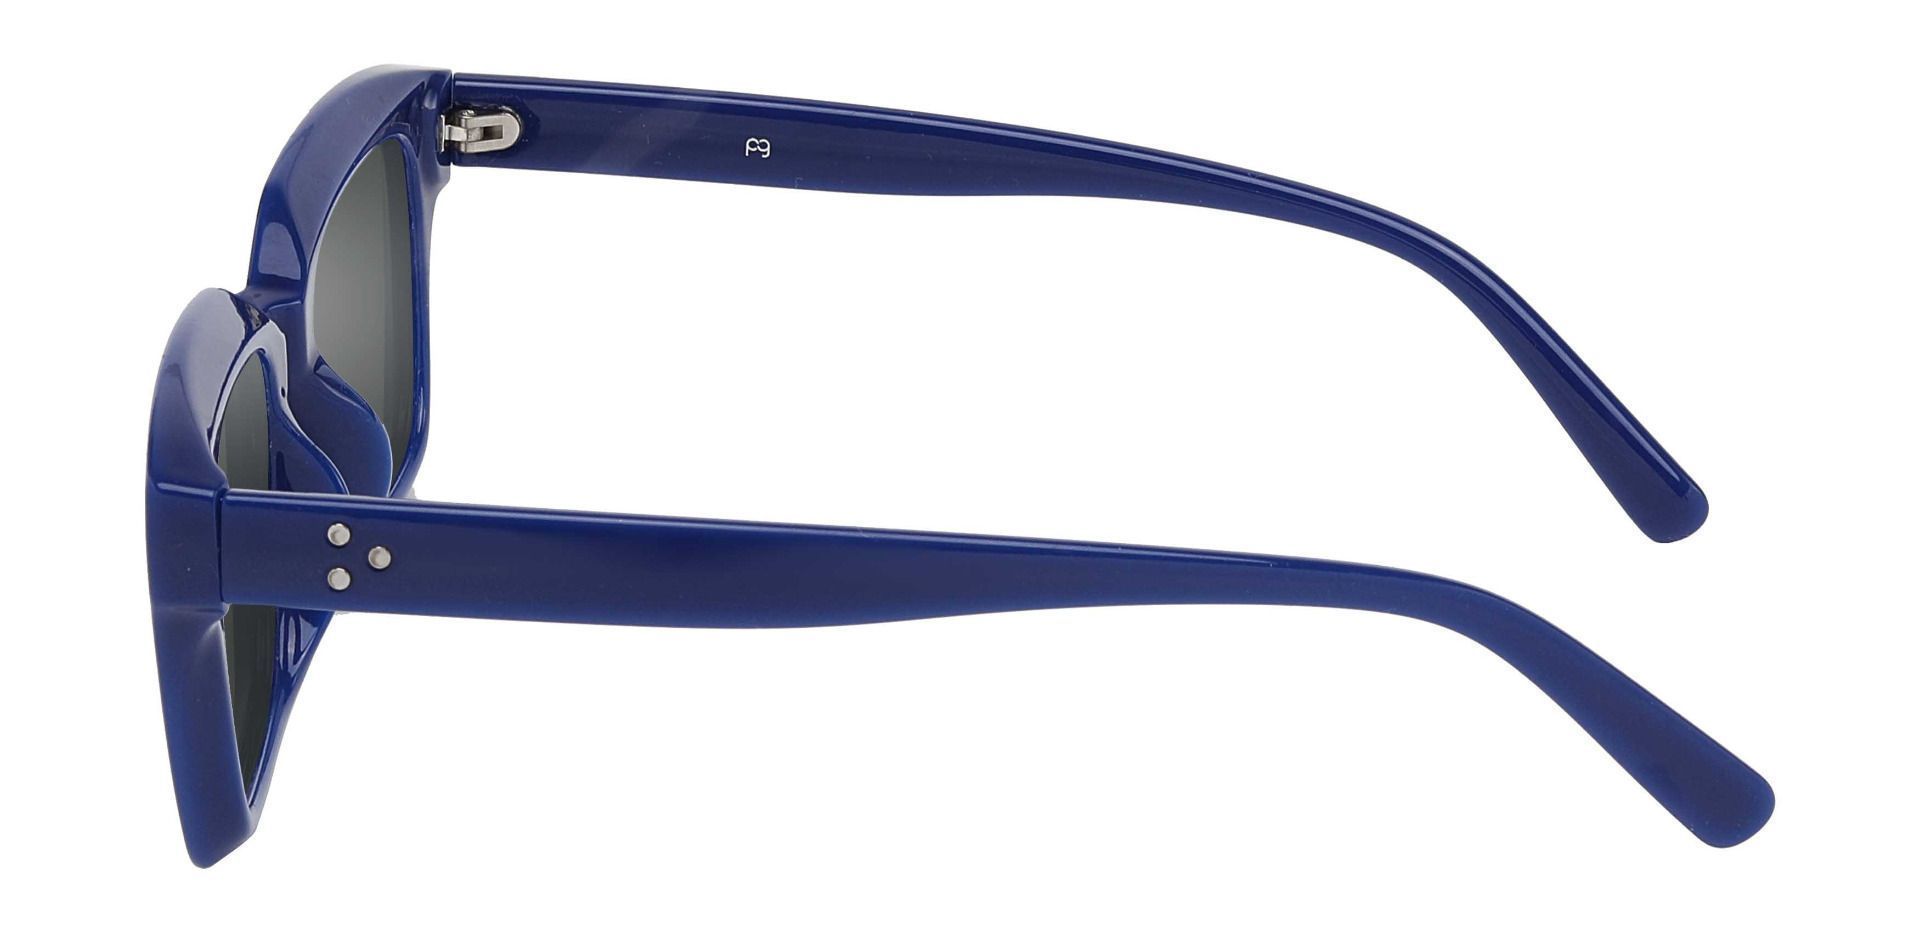 Unity Rectangle Reading Sunglasses - Blue Frame With Gray Lenses